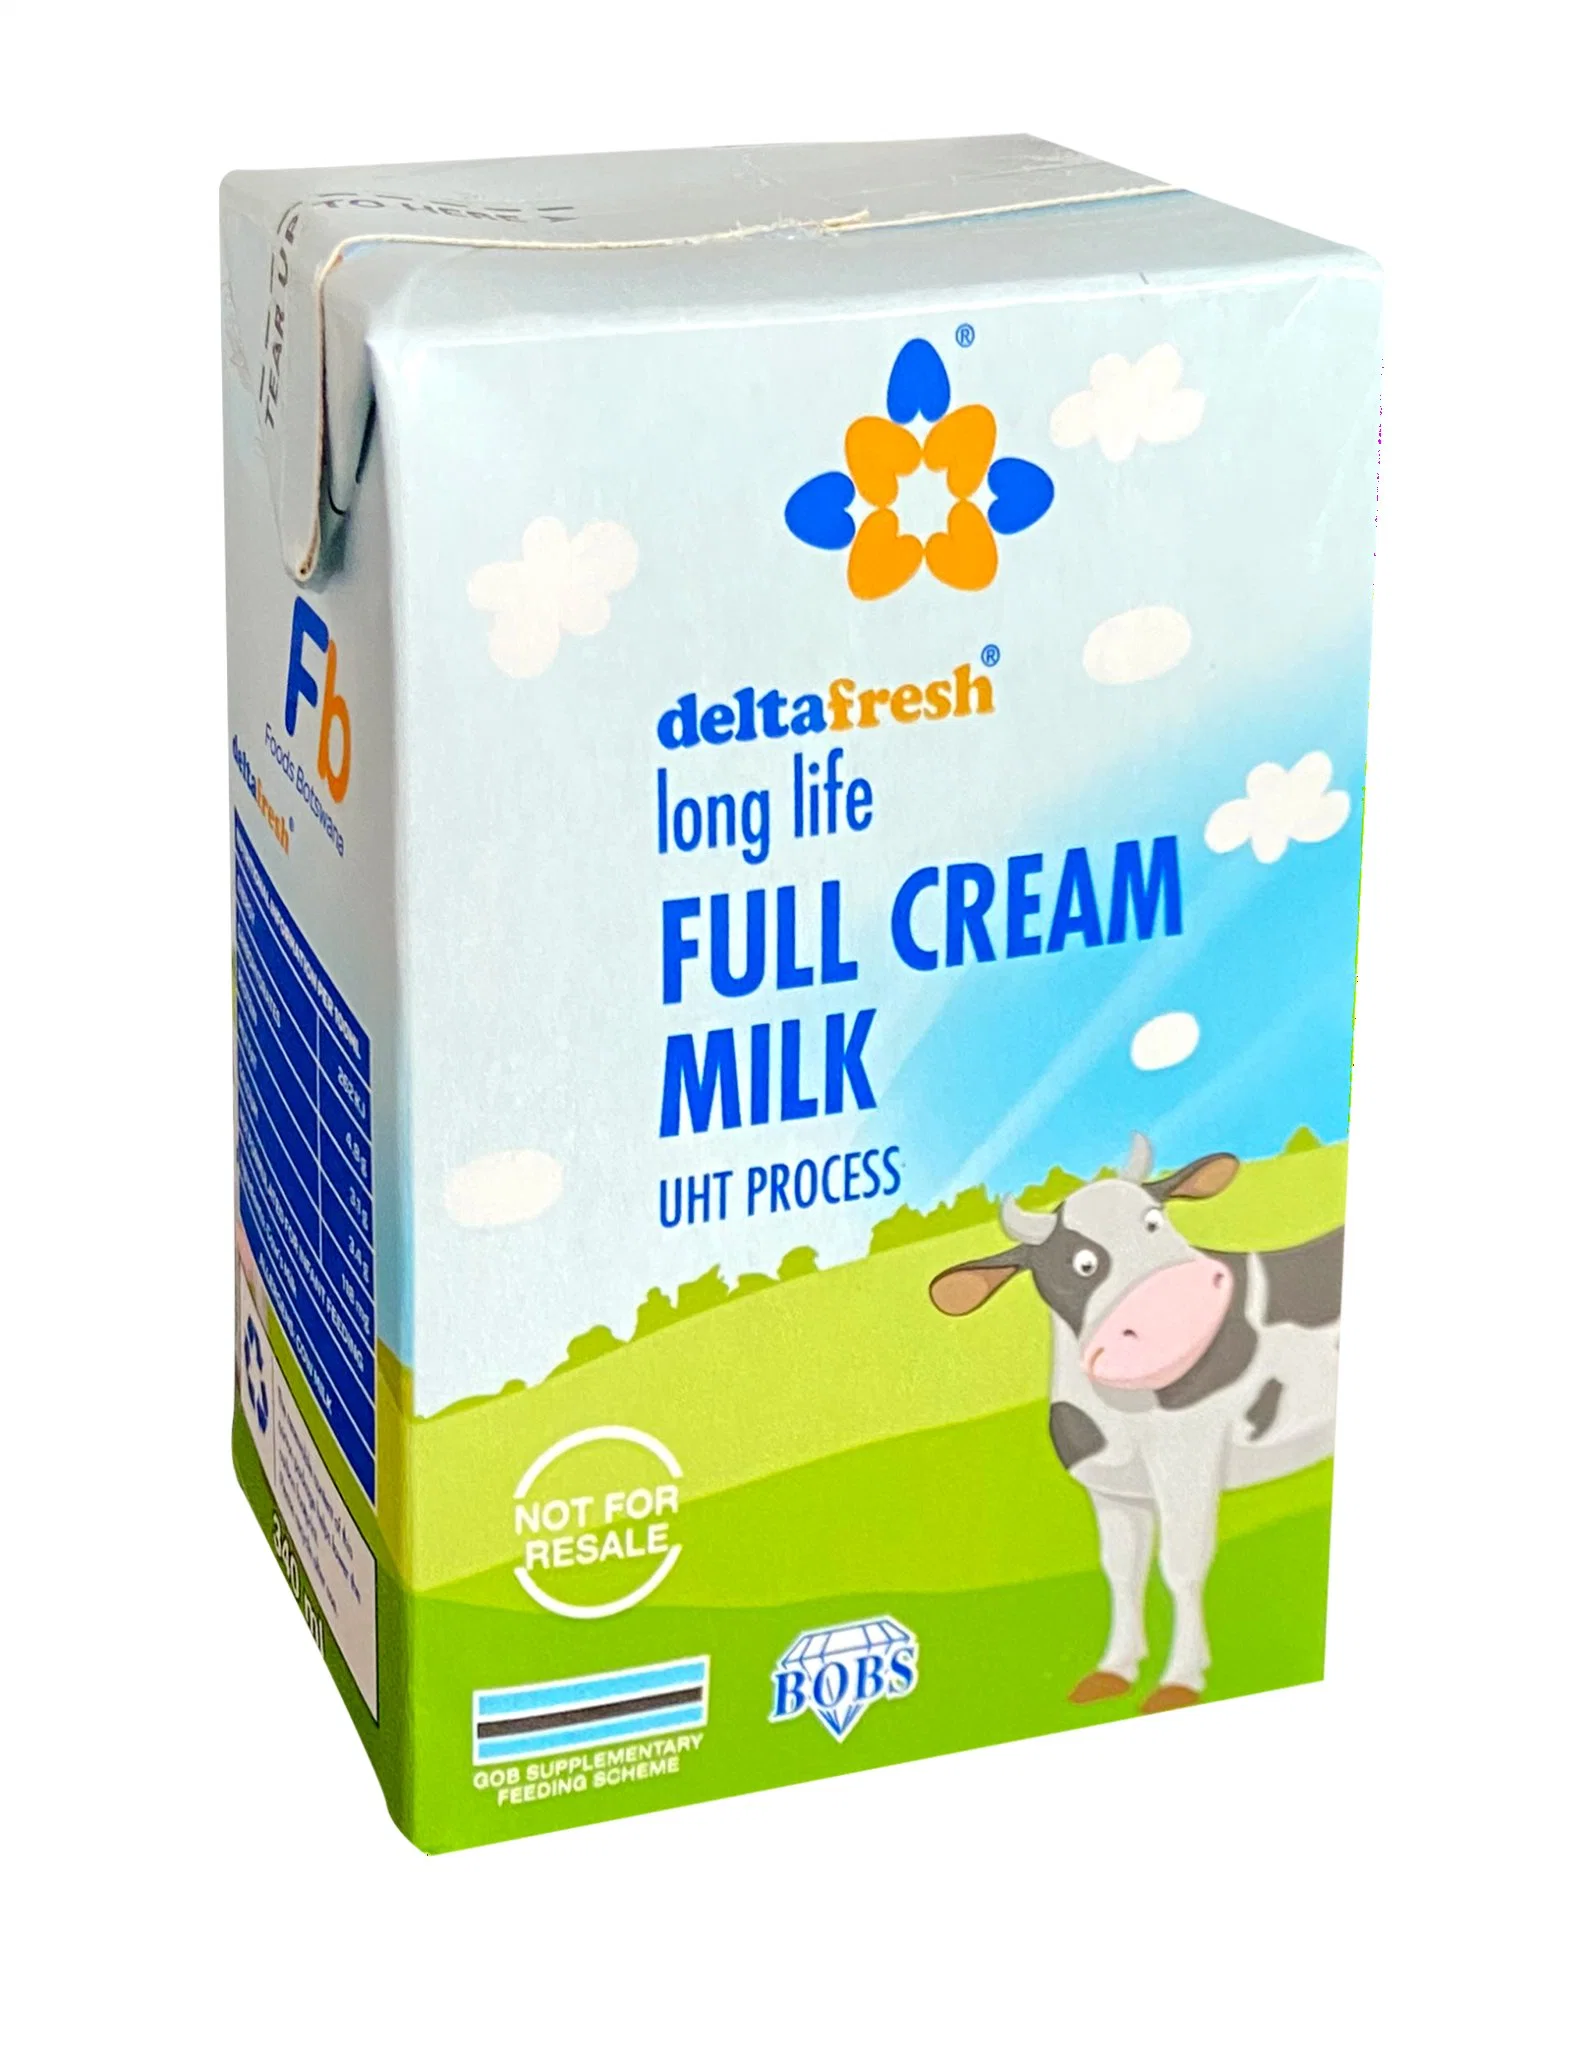 High quality/High cost performance Milk Carton Juice Carton;Soft Drink Aseptic Packaging Materials;Juice Milk Aseptic Packaging Paper Materials;Aseptic Brick Carton for Liquid Food